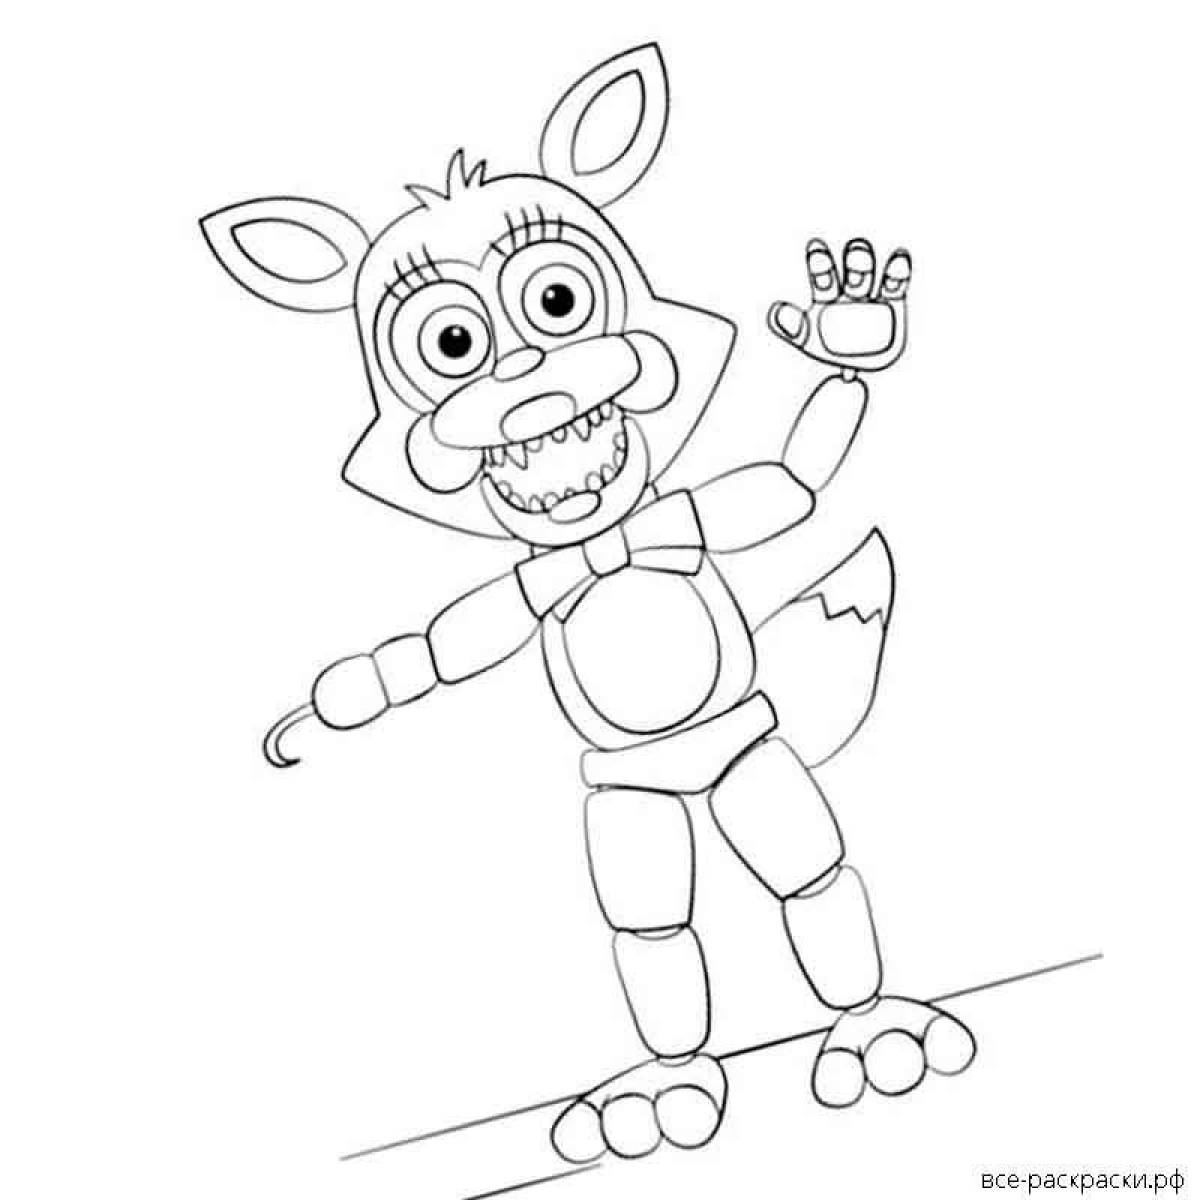 Great mangle coloring book